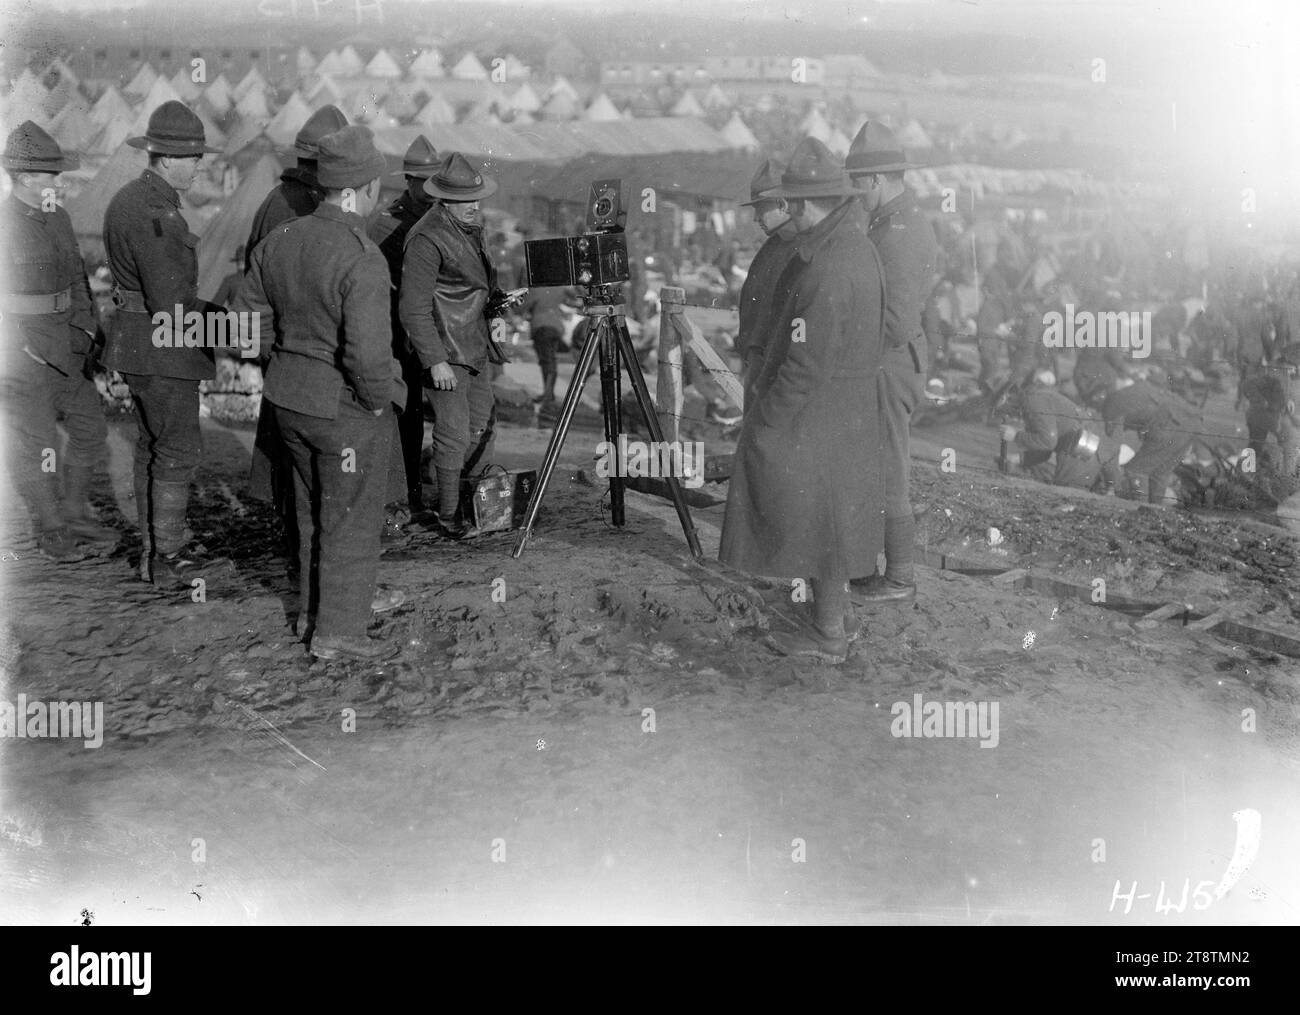 New Zealand soldiers looking at the official photographer's camera in France, World War I, NZ soldiers inspect the official photographer's cine camera mounted on a tripod in the grounds of the New Zealand Infantry Base Depot at Etaples. Tents and huts can be seen in the background. Photograph taken 15 January 1918 Stock Photo